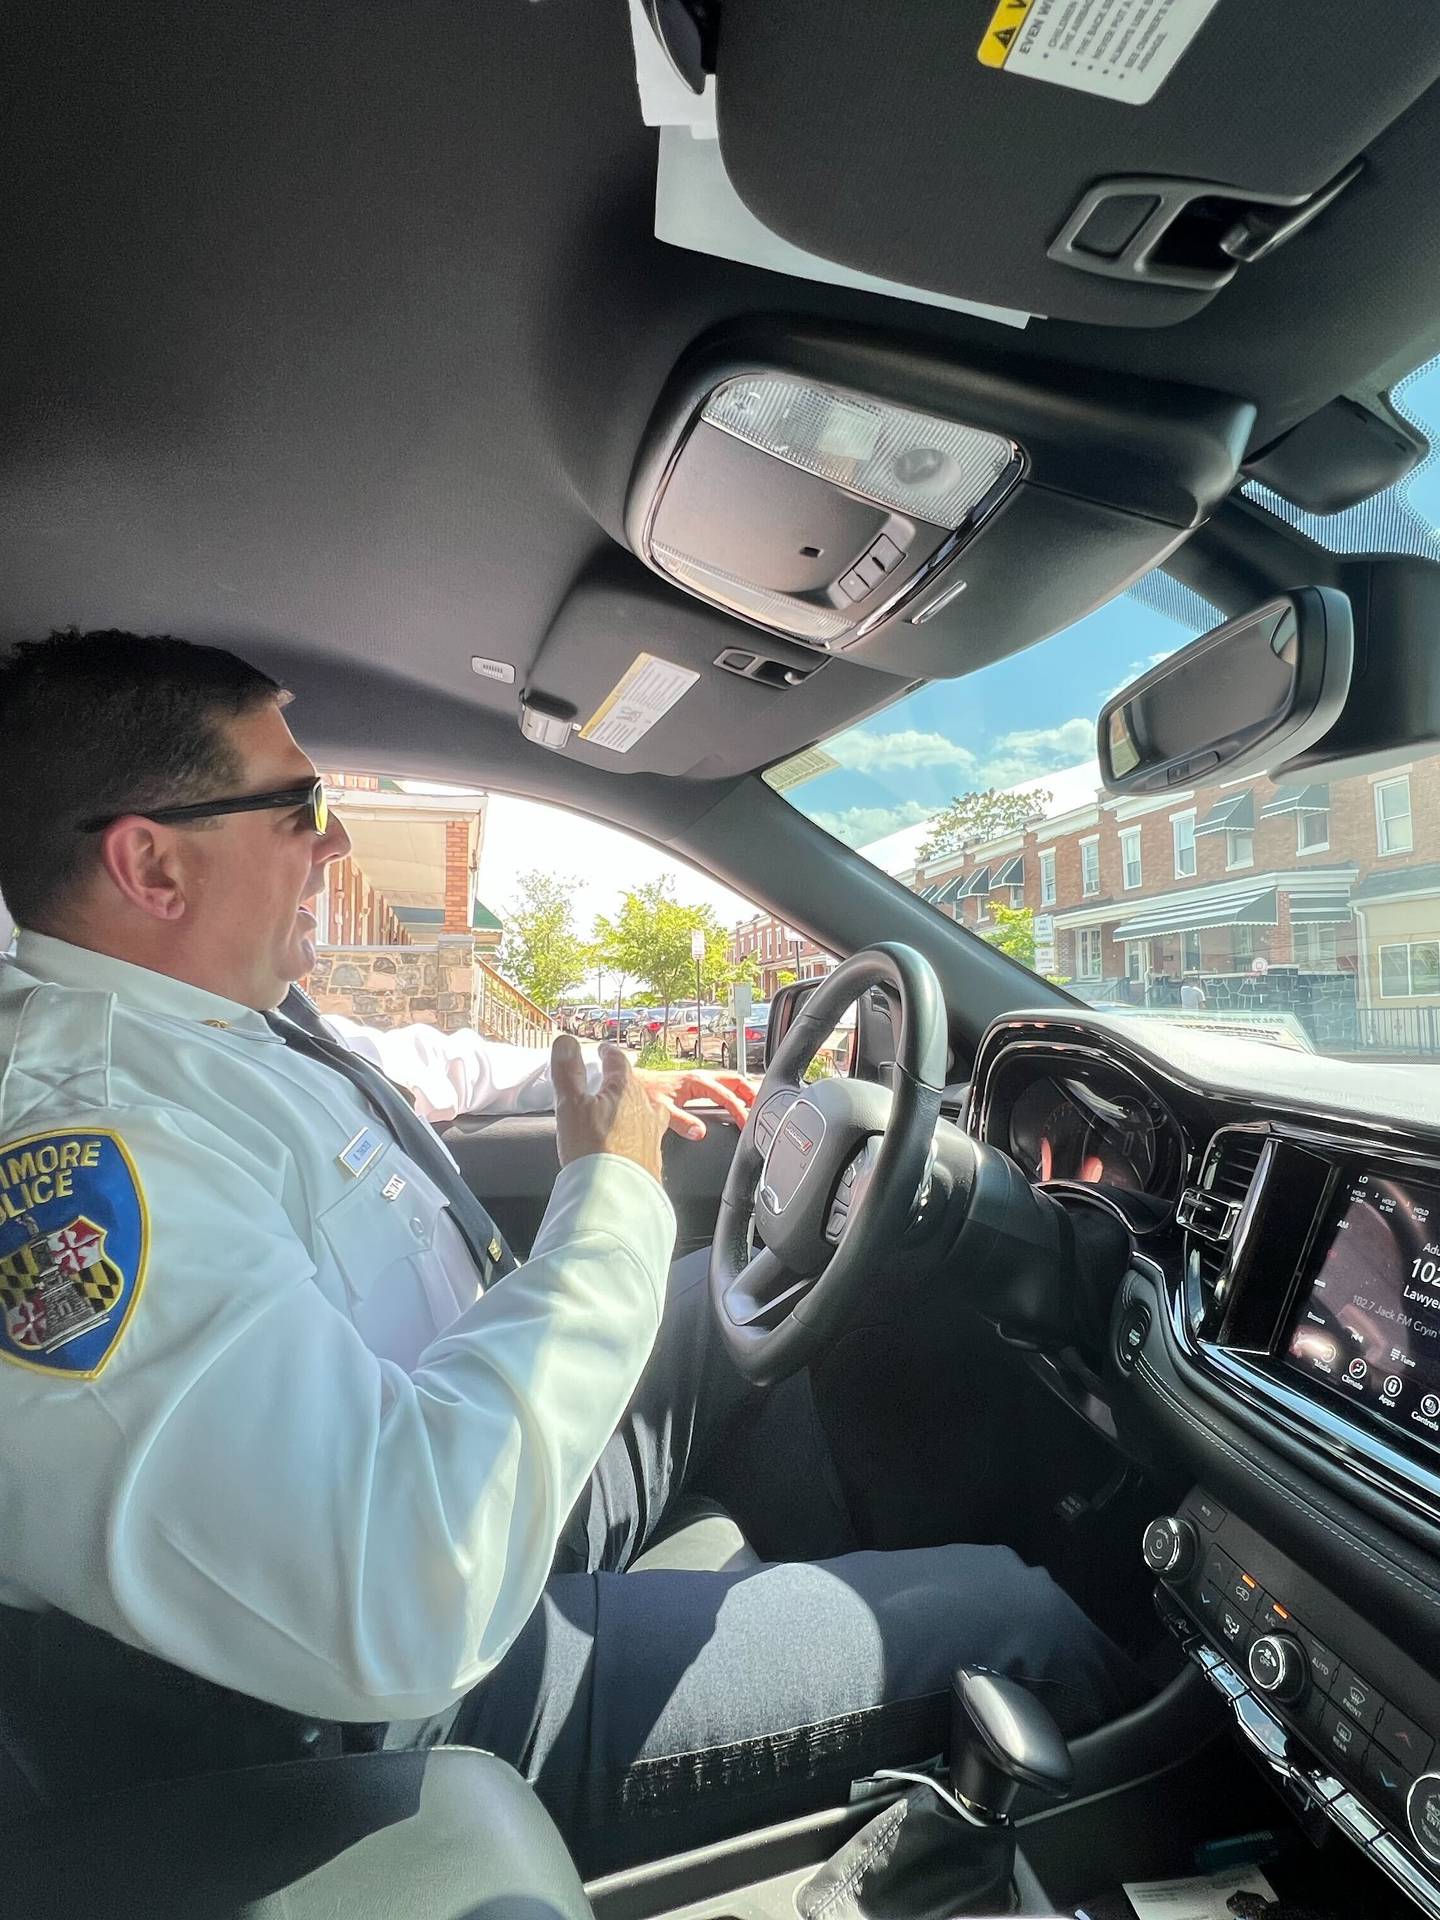 Eastern District Maj. Guy Thacker sits in his vehicle keeping an eye on the corner of North Potomac and East Preston streets, where he says there is concern about the potential for violence. Police no longer "clear corners," but do approach or keep an eye on people clustering in areas of concern. Residents say it's harassment.